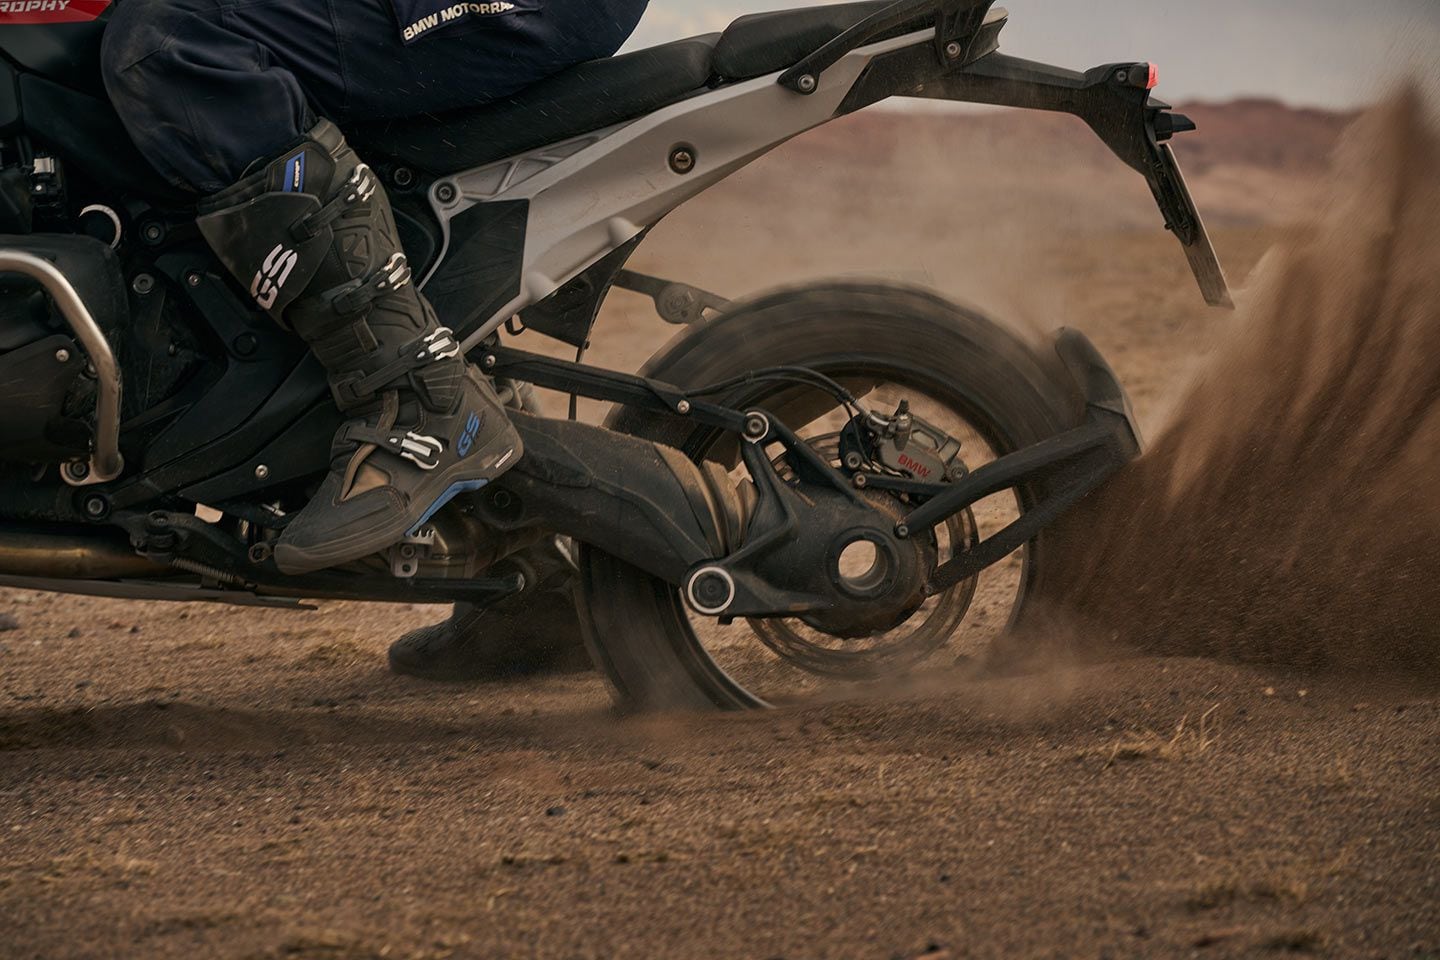 With the shorter engine comes a longer swingarm. Take a look at the diameter of that rear axle.